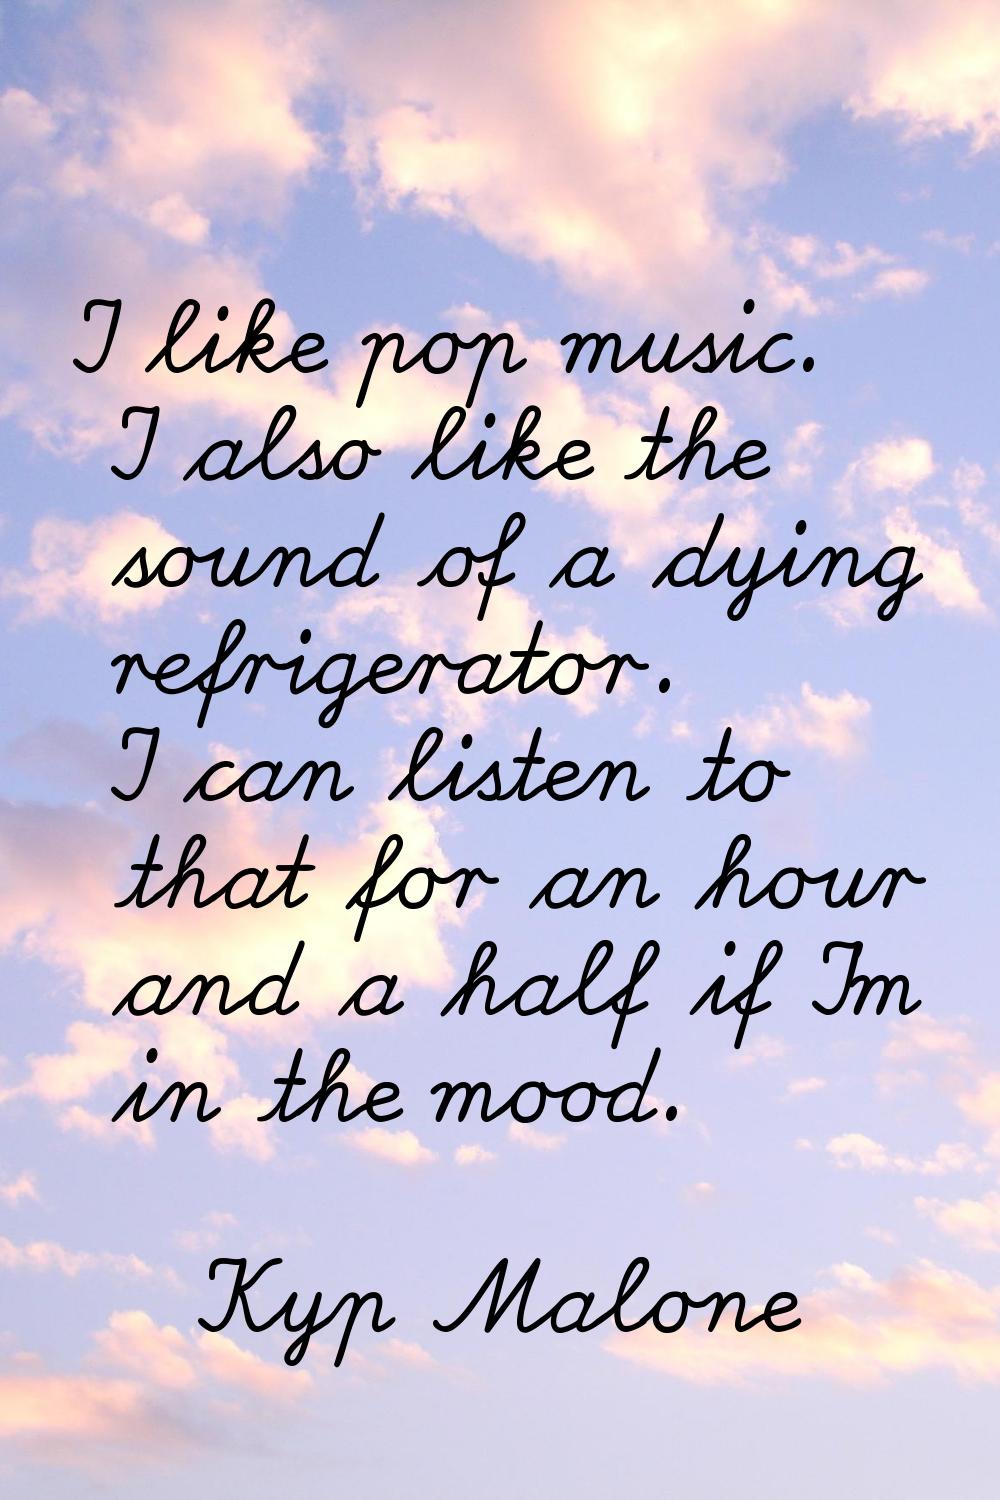 I like pop music. I also like the sound of a dying refrigerator. I can listen to that for an hour a